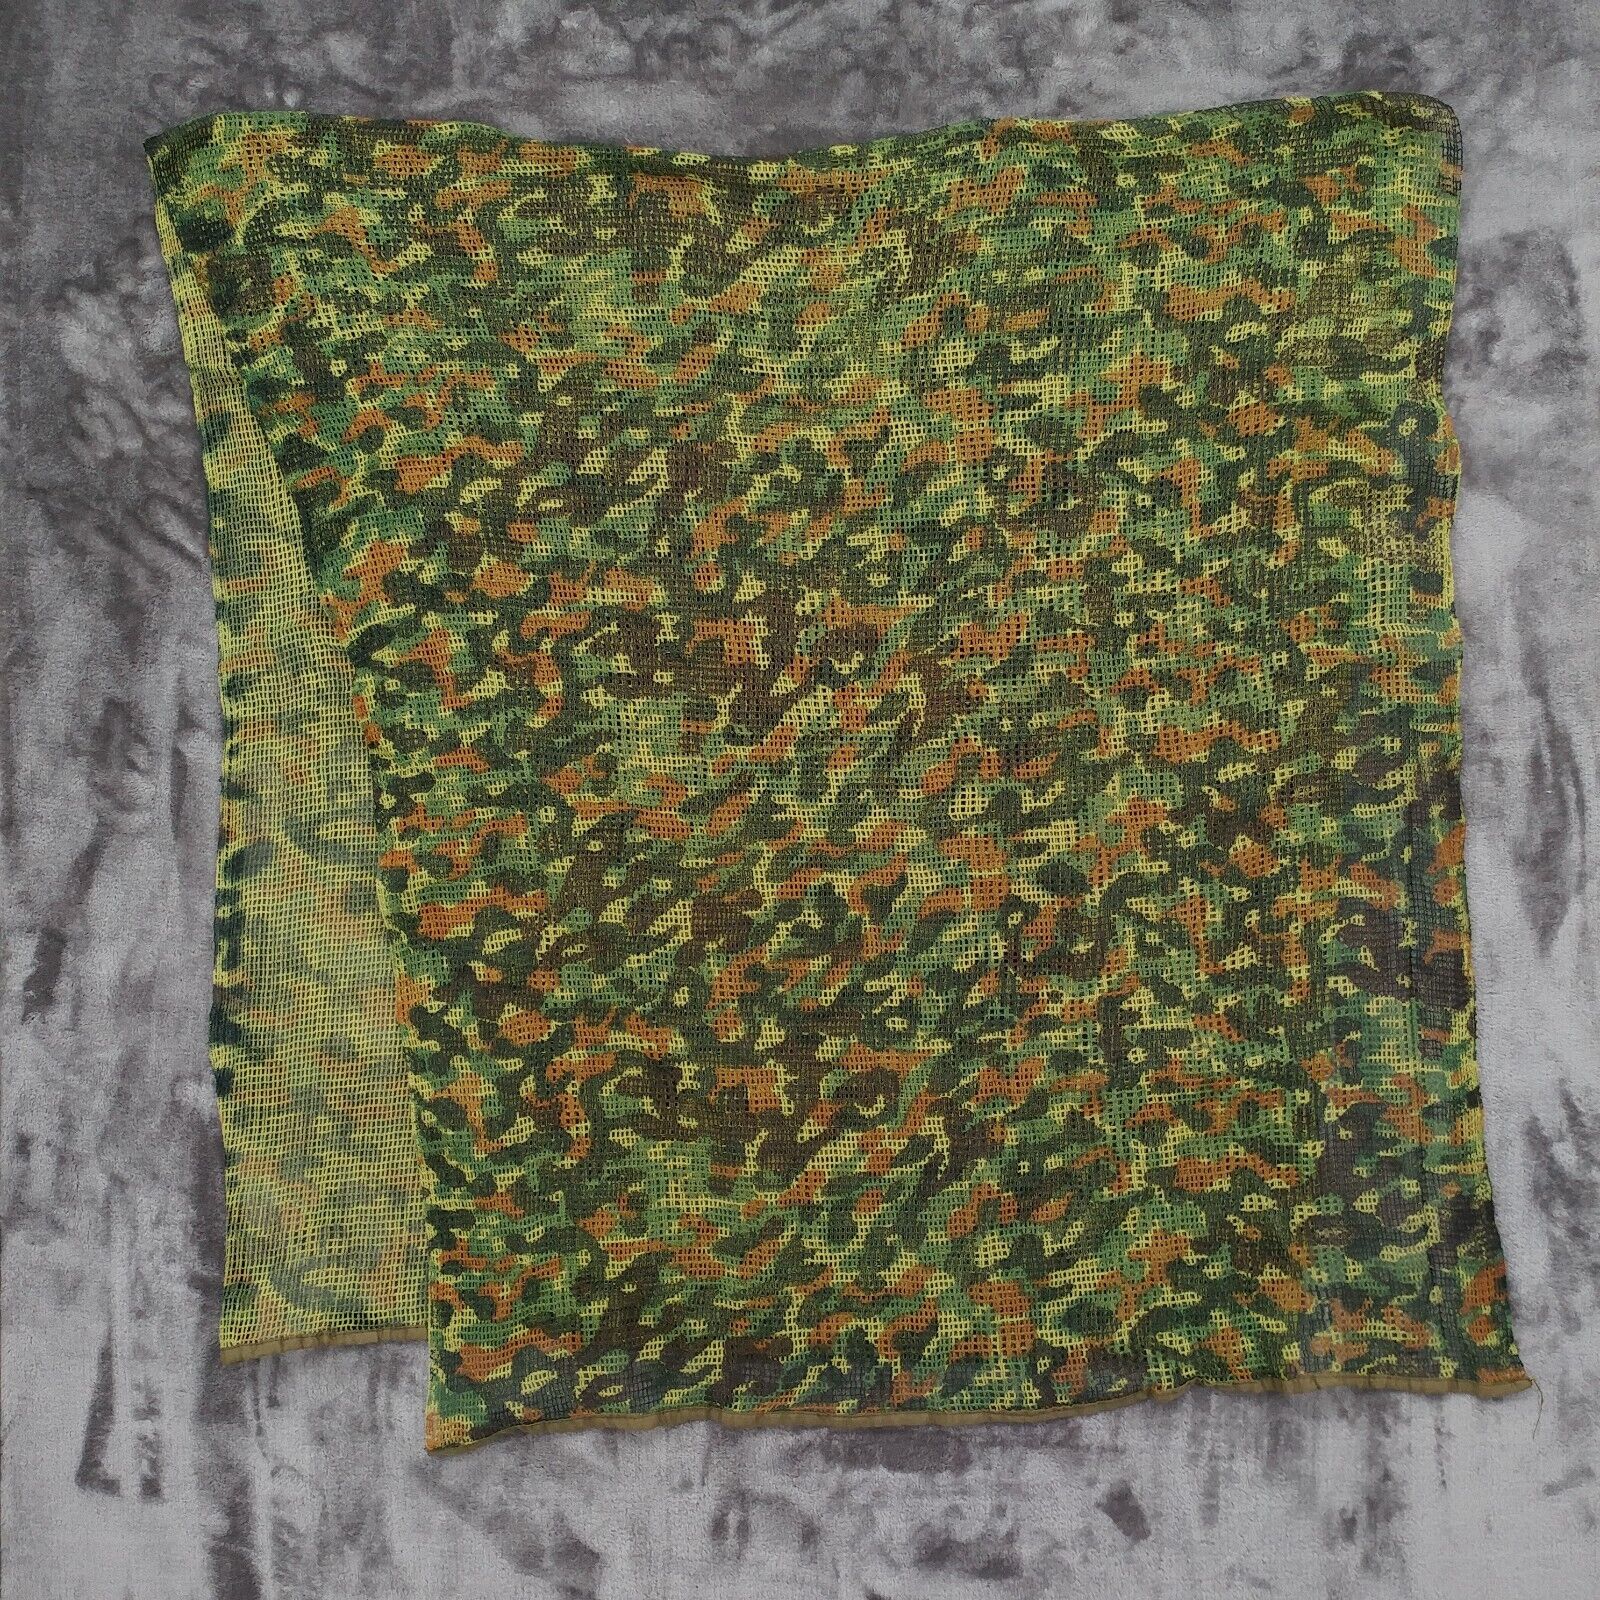 Mil-Tec Small Camouflage Fabric Mesh Net Wrap Cover 70\